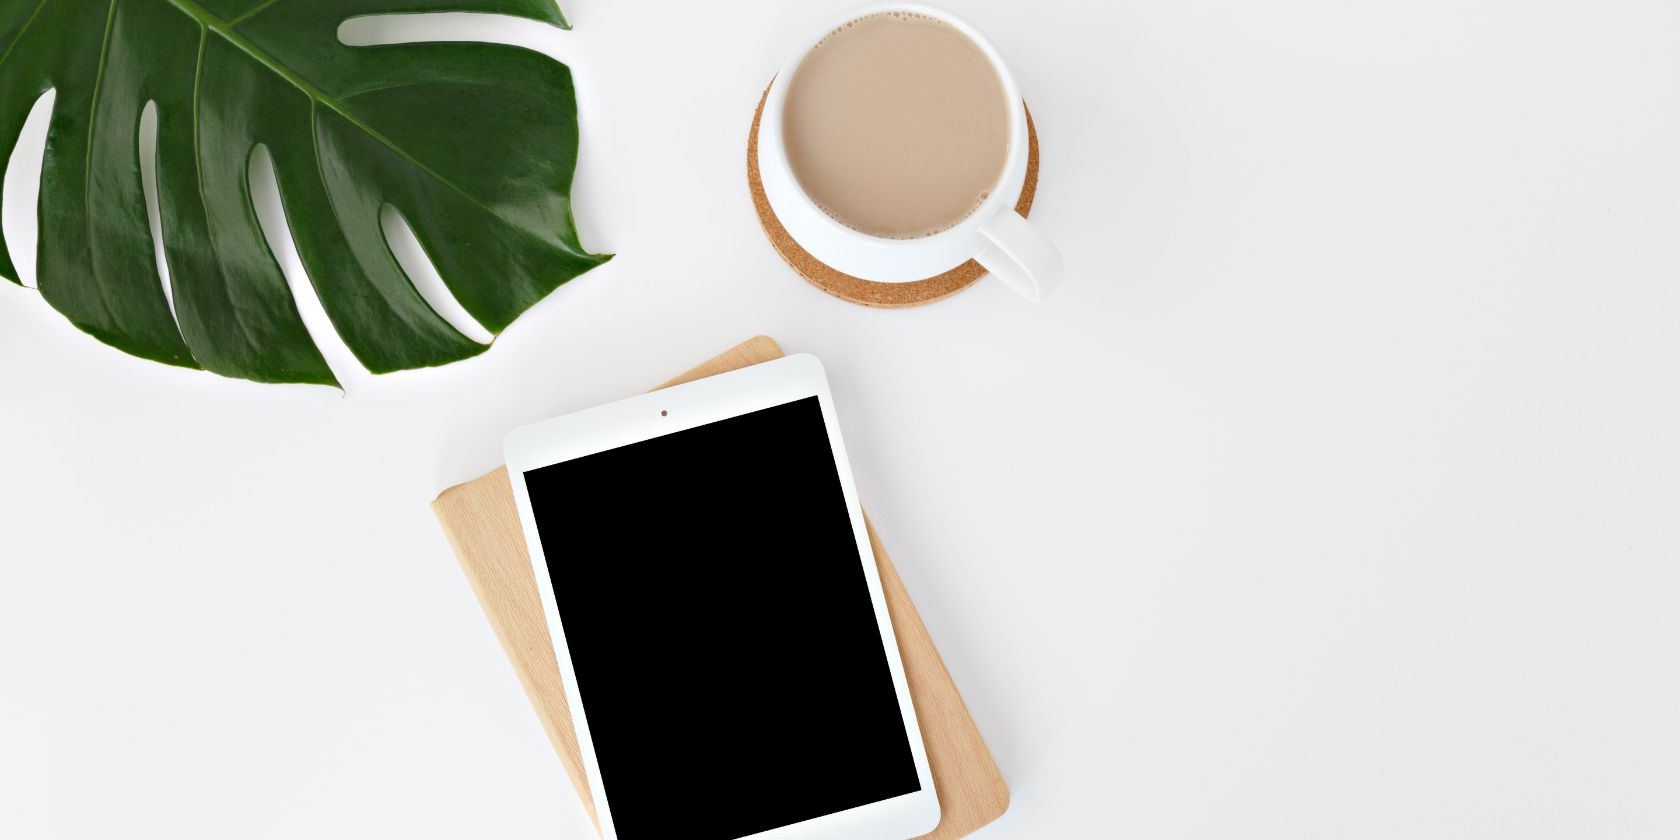 A tablet, a plant, and a cup of coffee on a desk